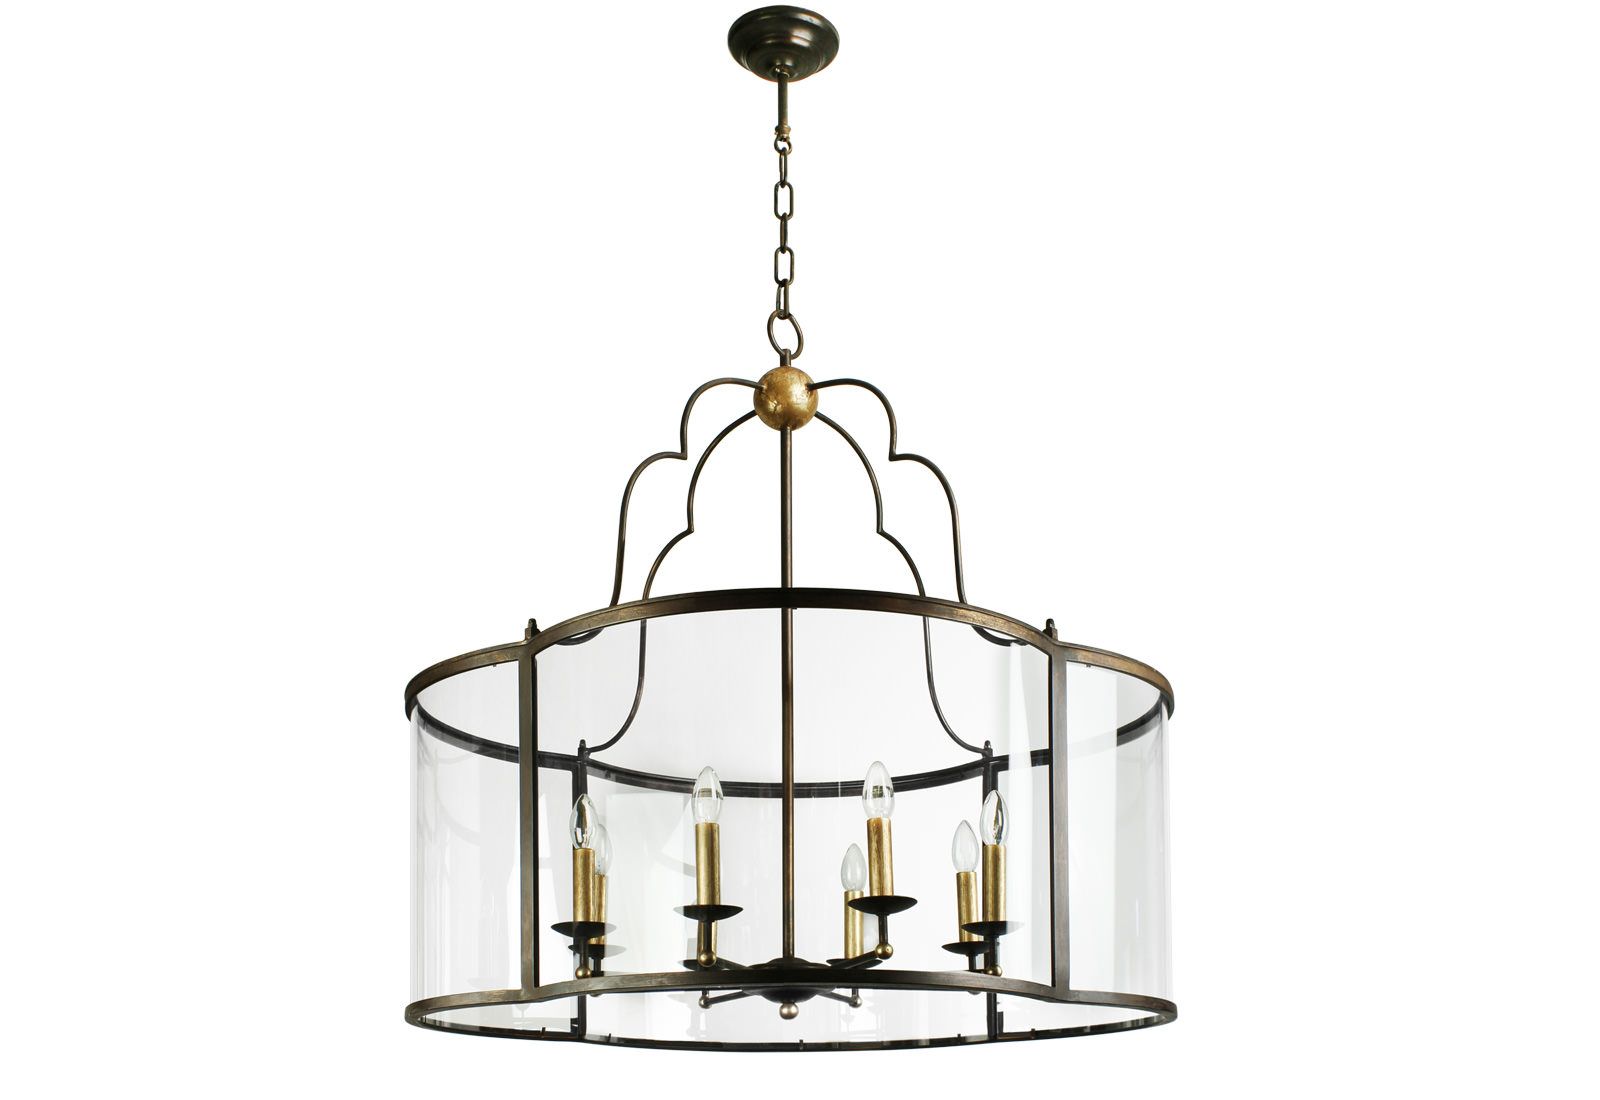 Arezzo – Abrissi Intended For Newest Steel Lantern Chandeliers (View 2 of 15)